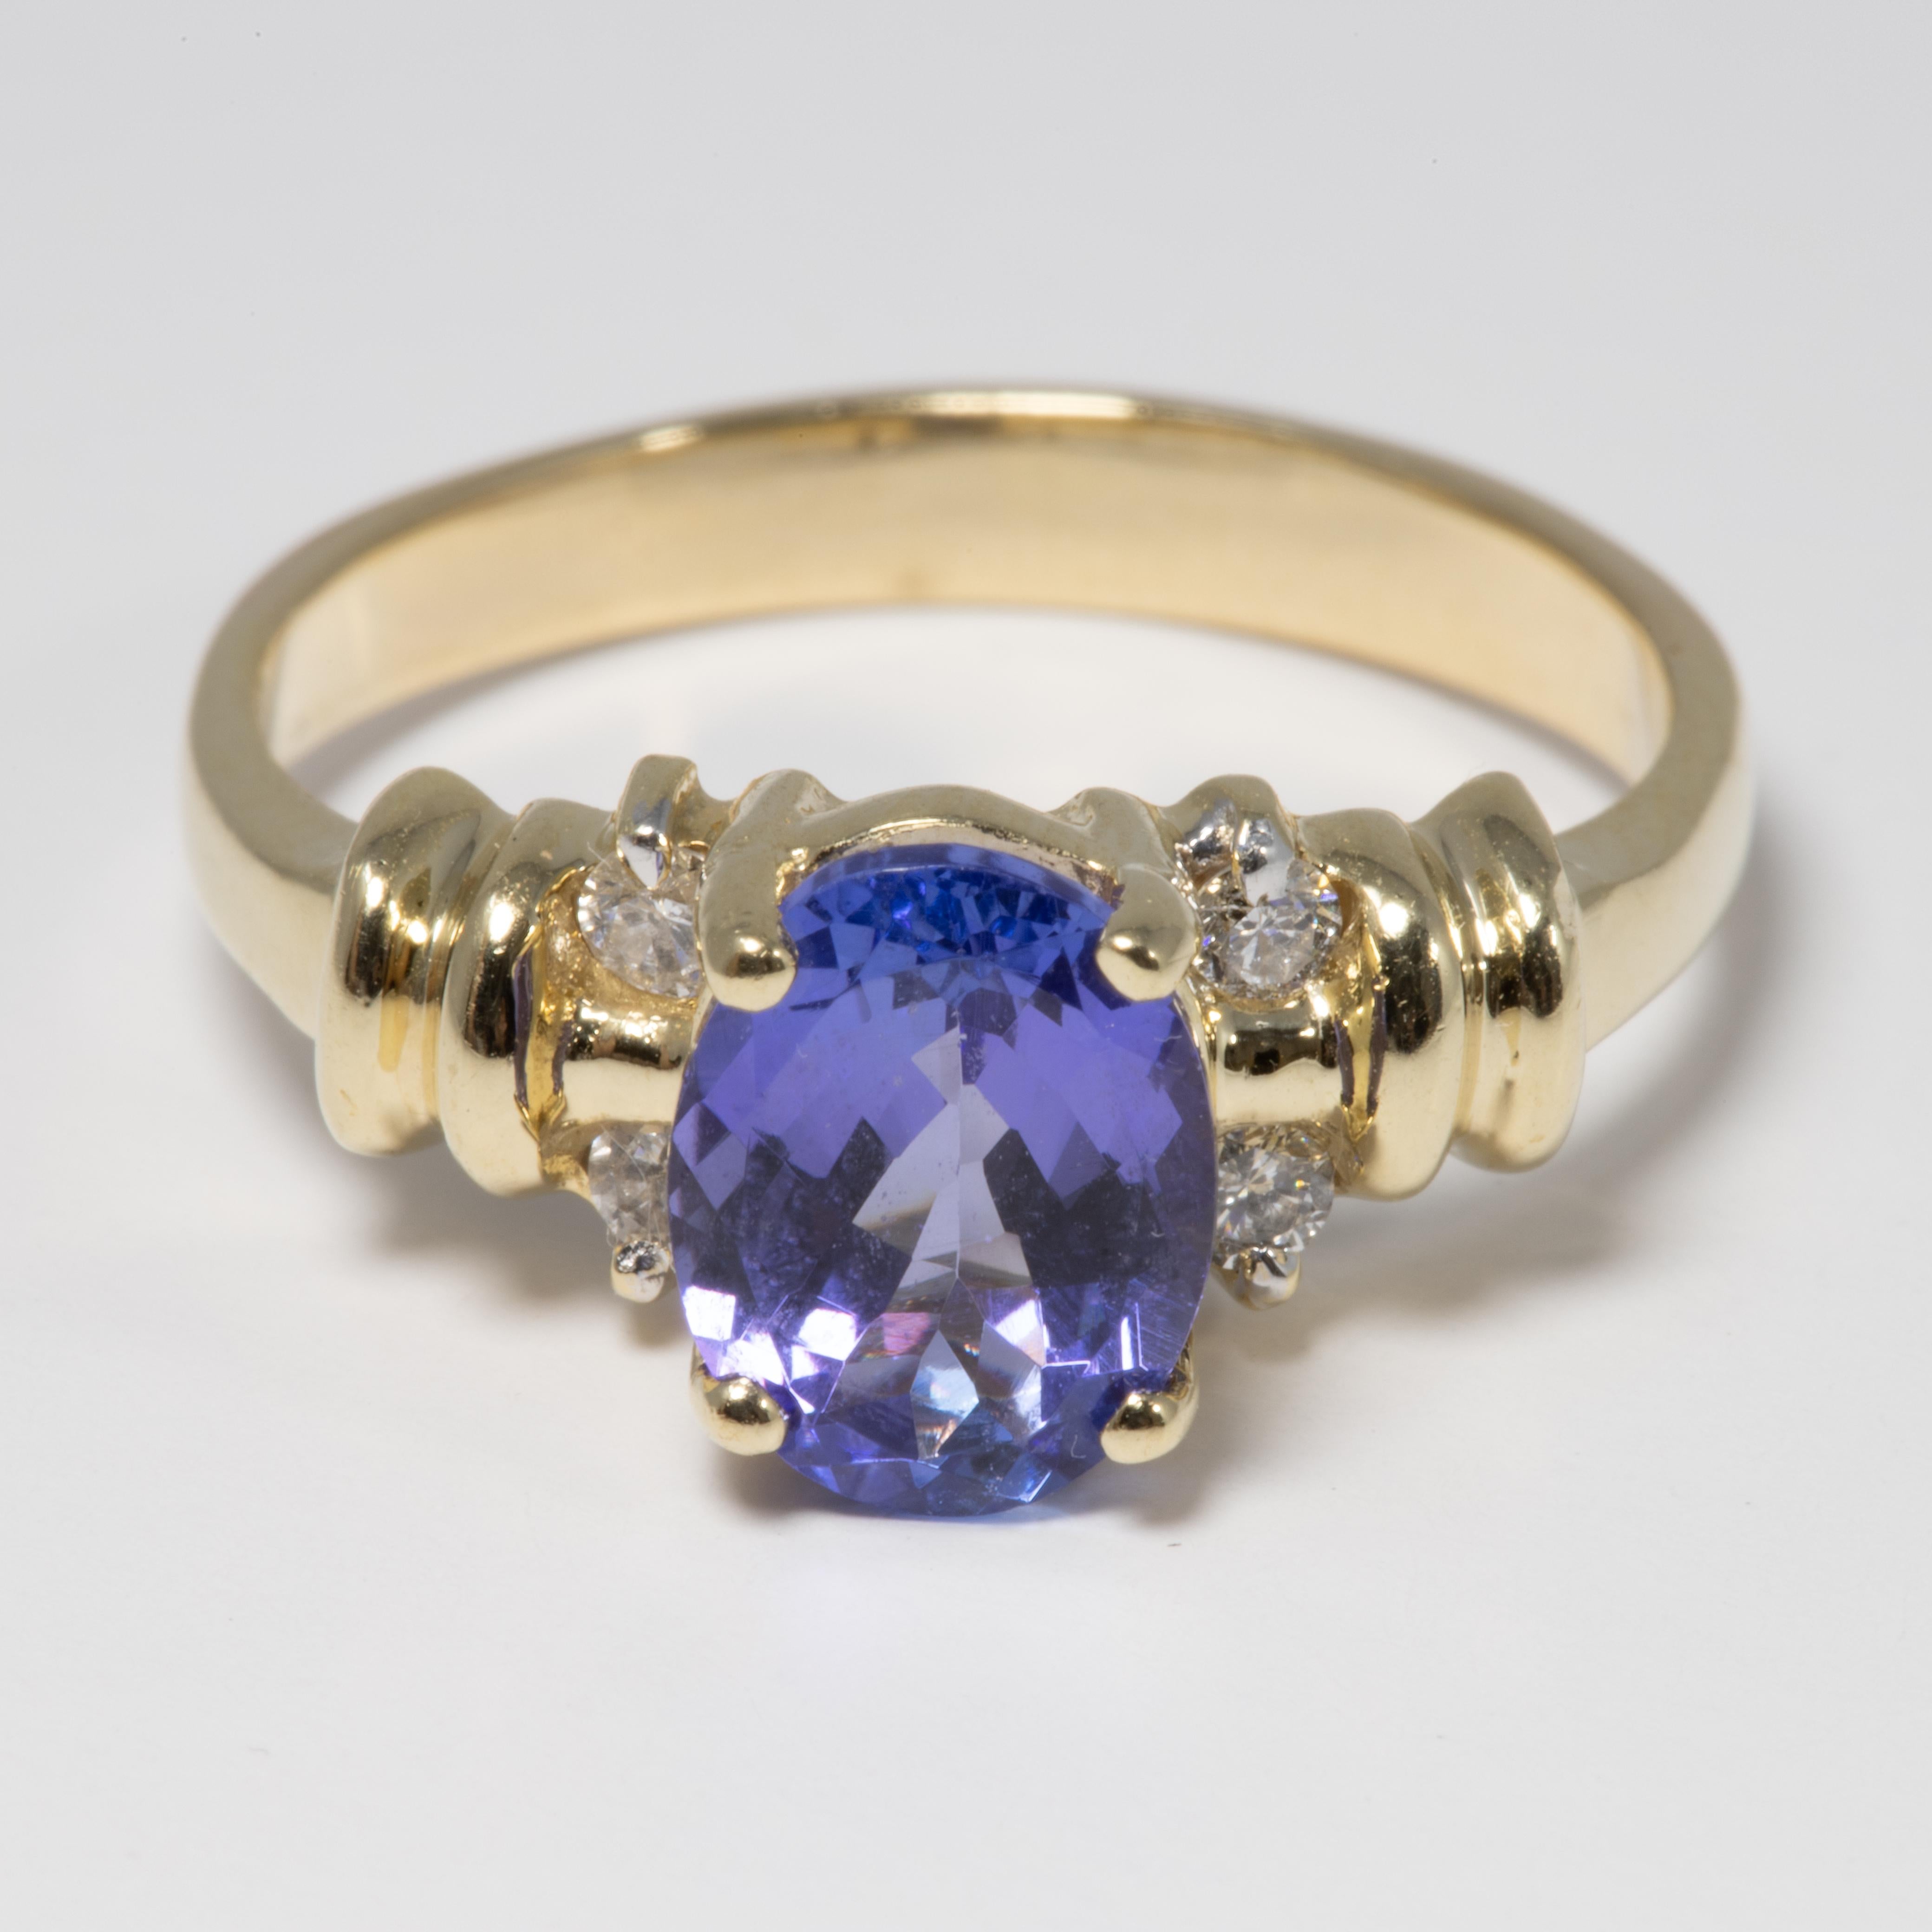 Mixed Cut Amethyst and Diamond 14 Karat Yellow Gold Ring, Solitaire Prong Setting For Sale